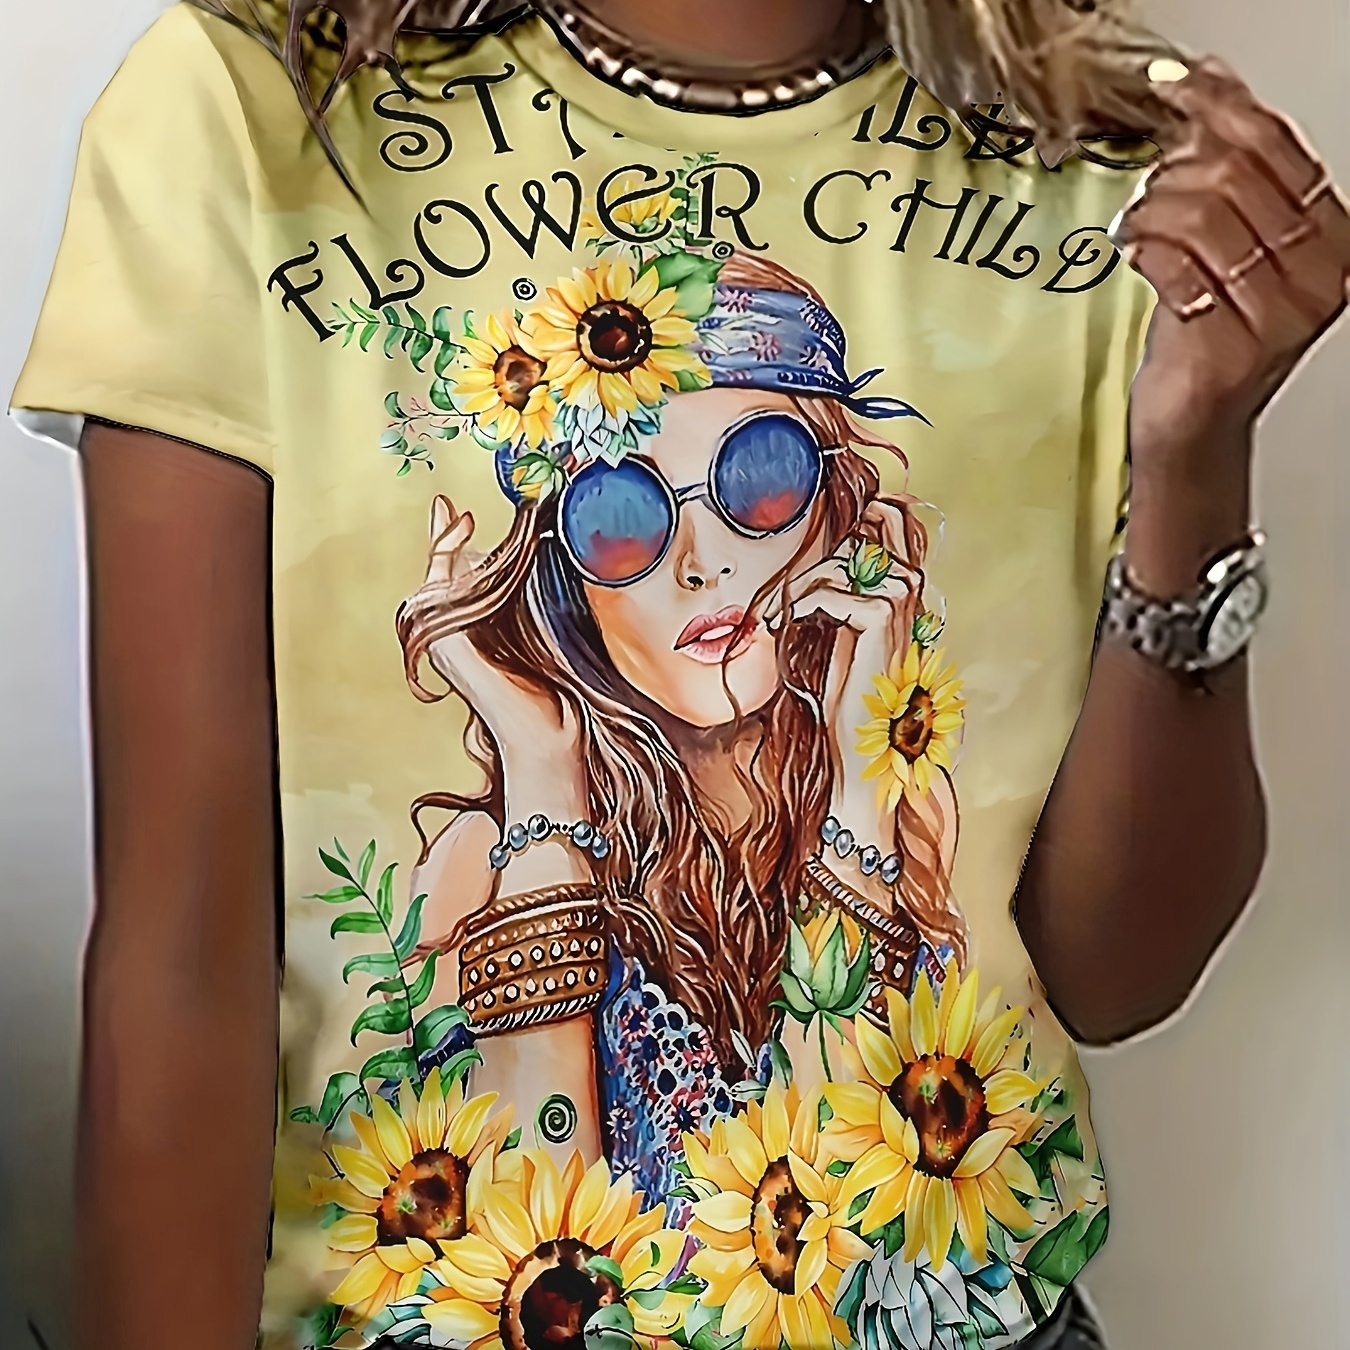 

Women's Sunflower Print T-shirt, Fashion Streetwear With Artistic Girl Pattern, Casual Summer Tee With Floral Design